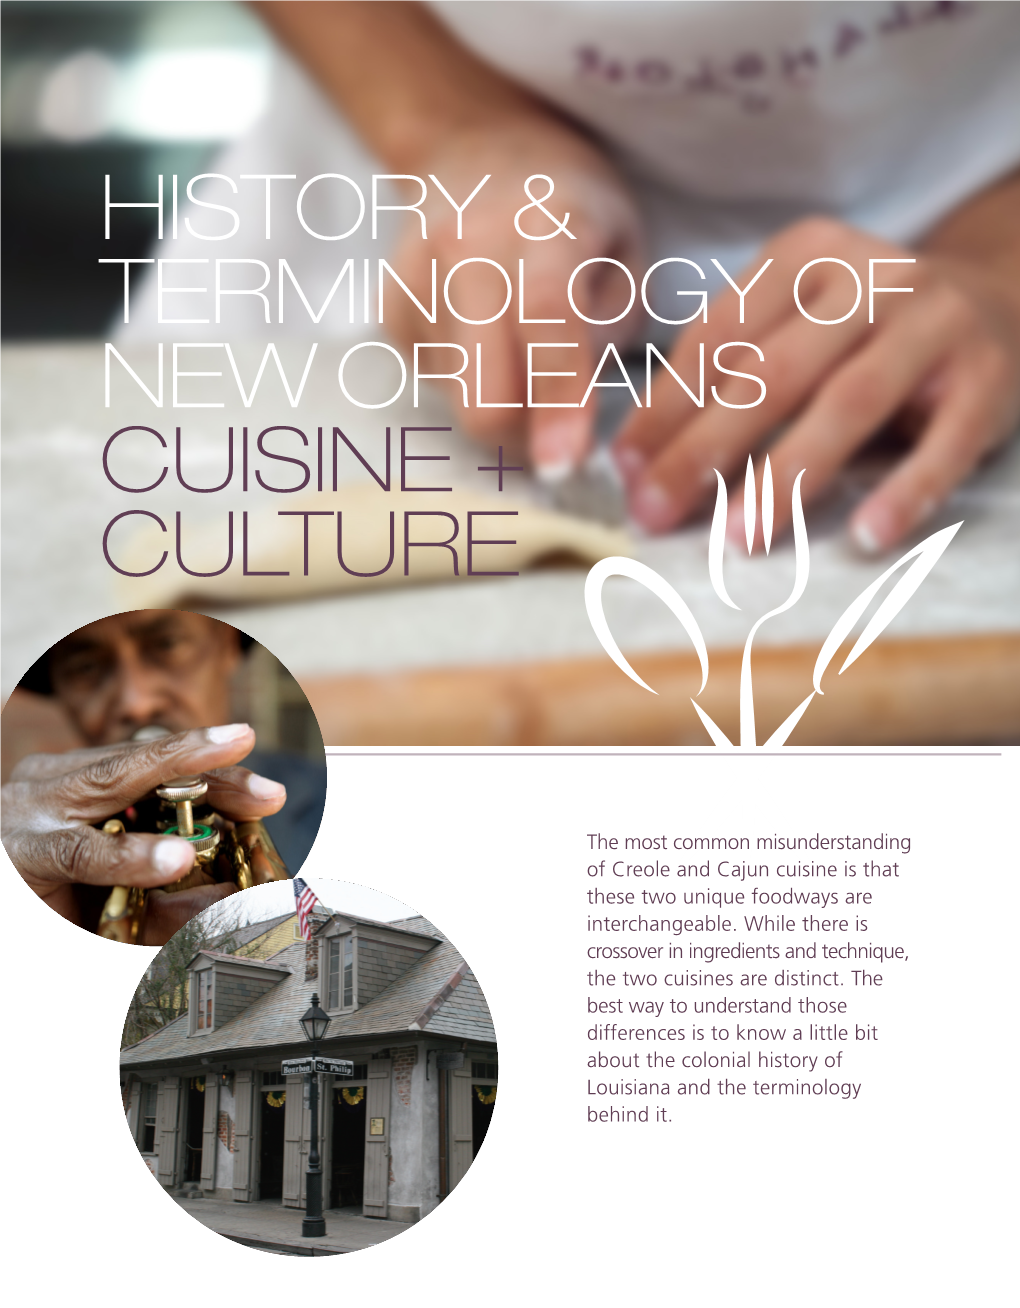 History & Terminology of New Orleans Cuisine + Culture